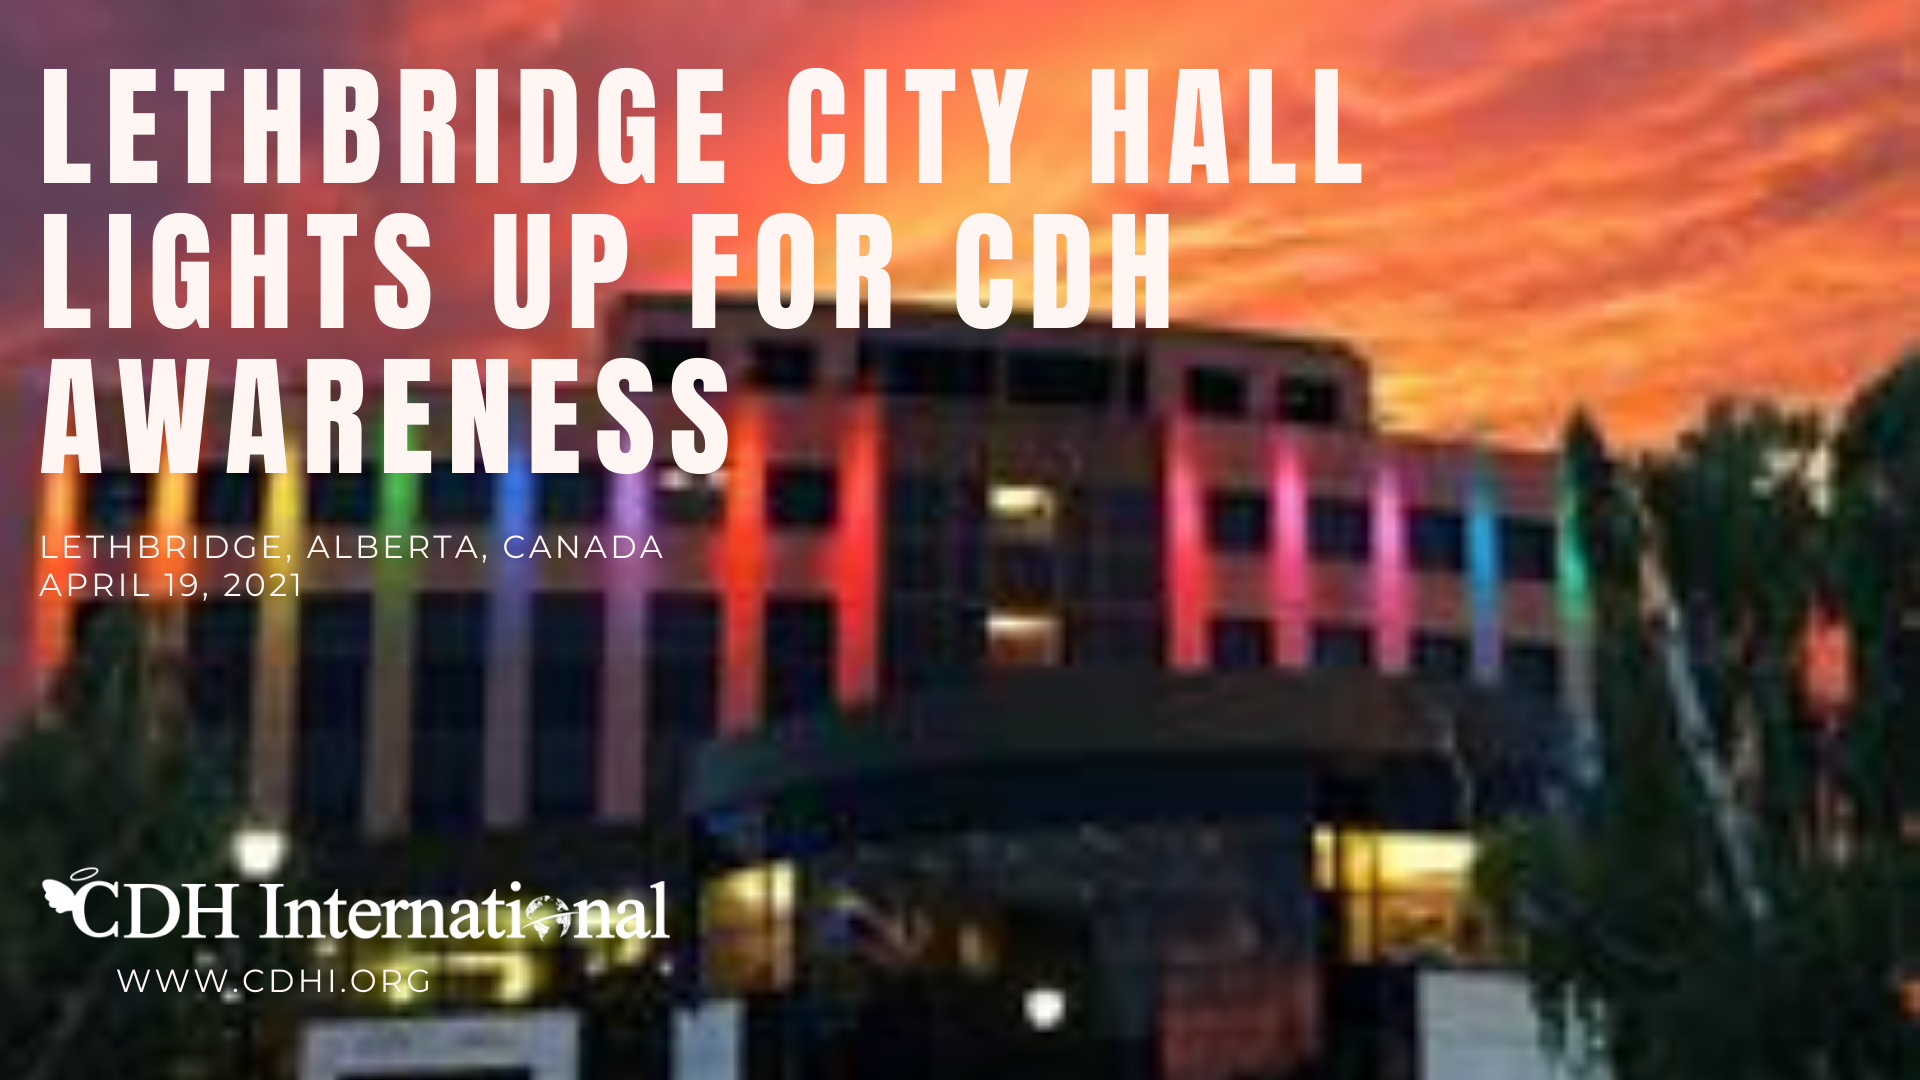 The Calgary Tower Lights Up for CDH Awareness